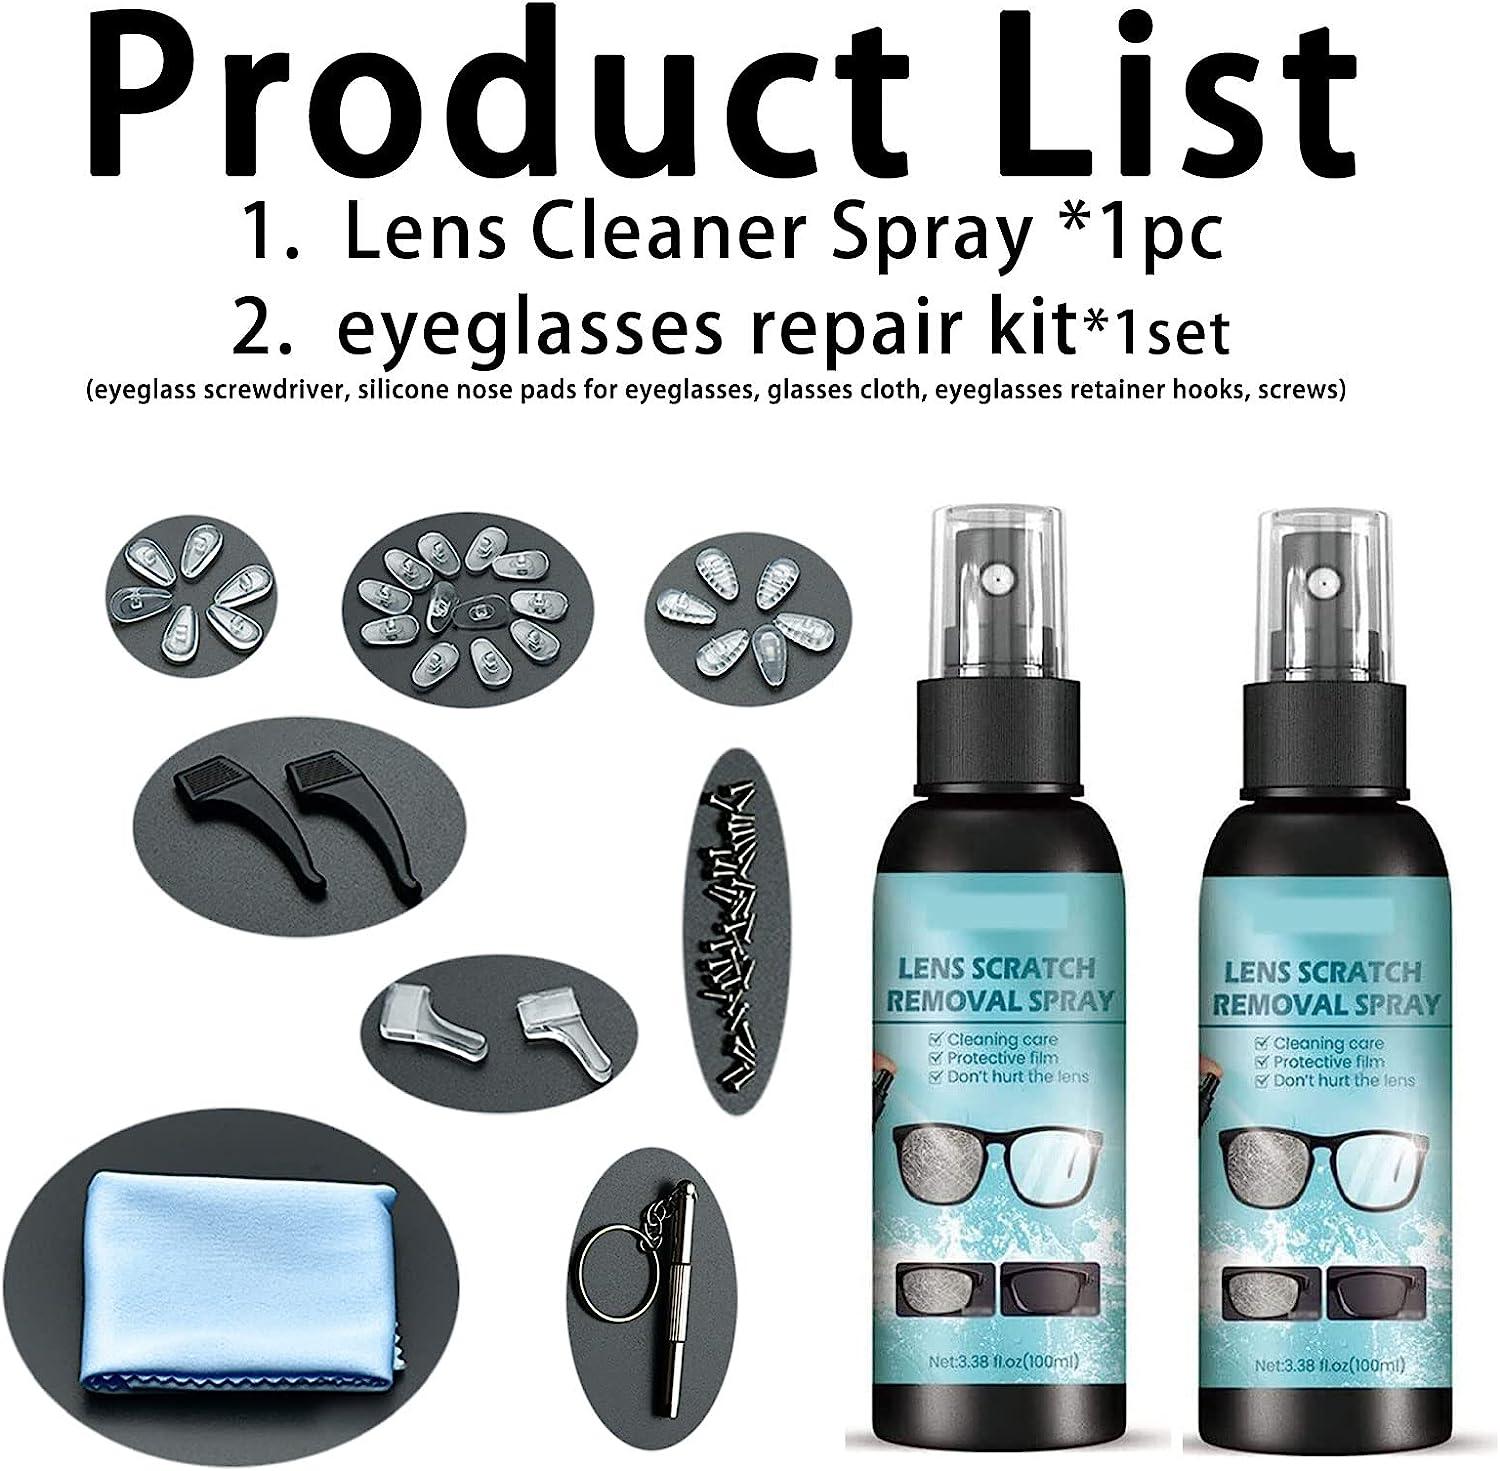  Lens Scratch Removal Spray, Eyeglass Windshield Glass Repair  Liquid, Lens Scratch Remover, Eyeglass Glass Scratch Repair Solution,  Glasses Lens Cleaning Spray for Sunglasses Screen Cleaning (1PC) : Health &  Household